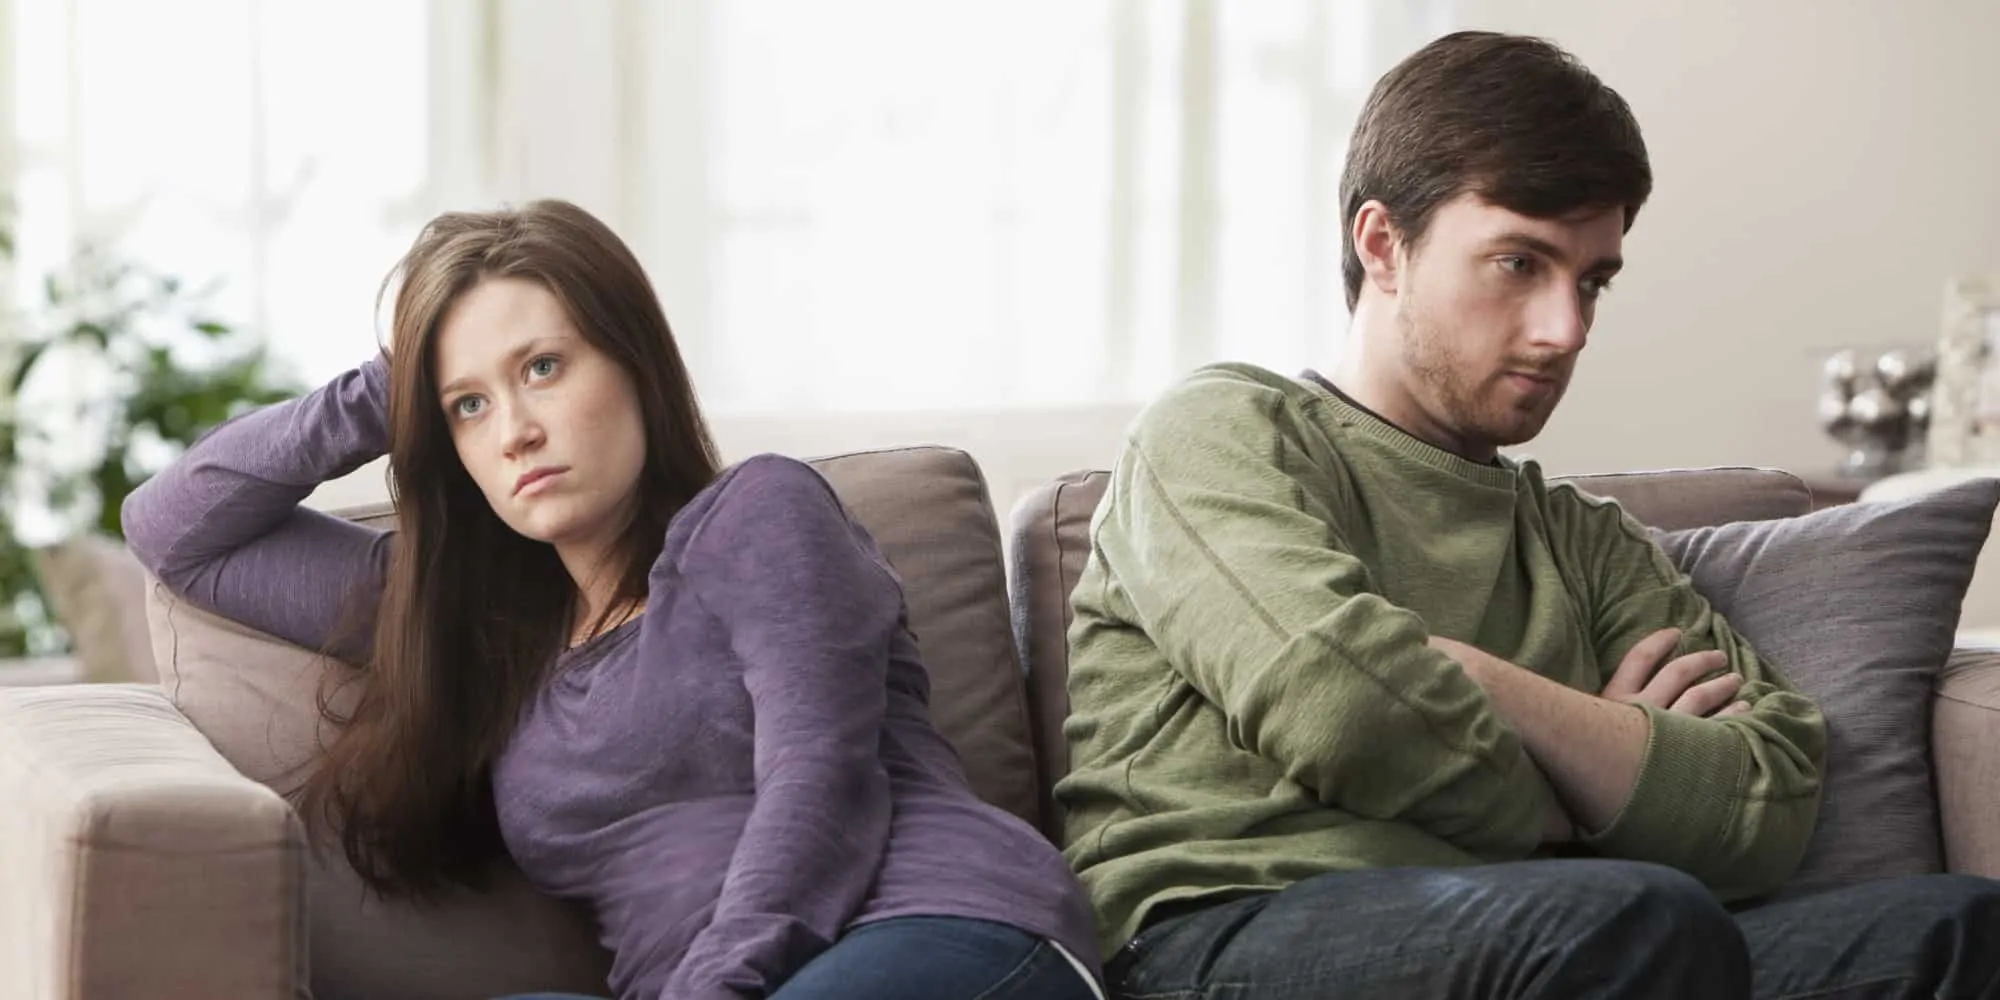 relationship isn't working - photo of unhappy couple